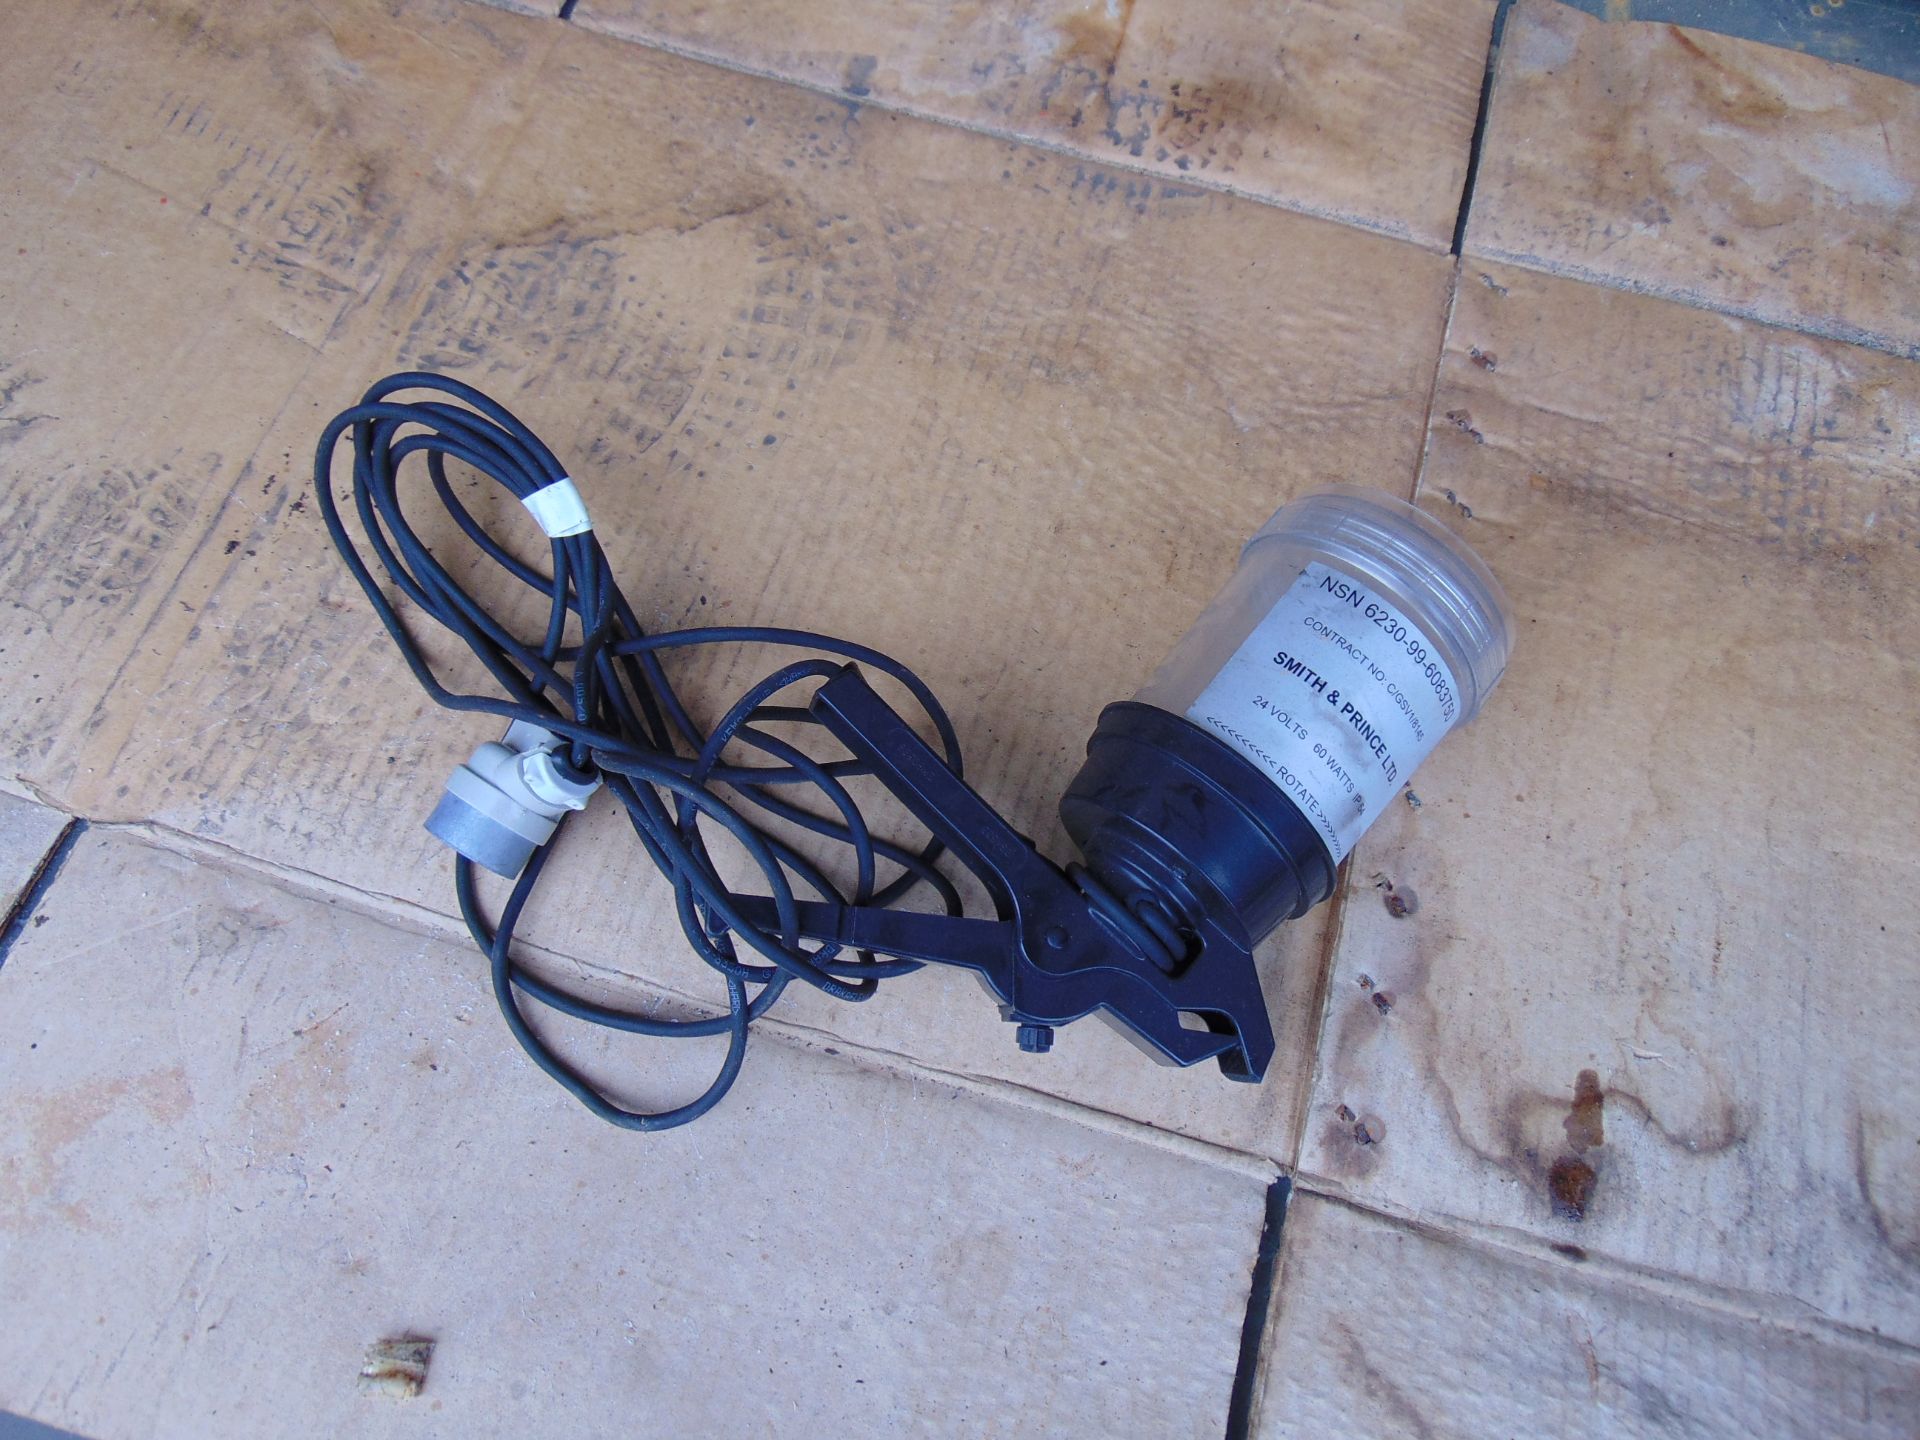 New Unissued Smith and Prince 24v Inspection Lamp - Image 4 of 5